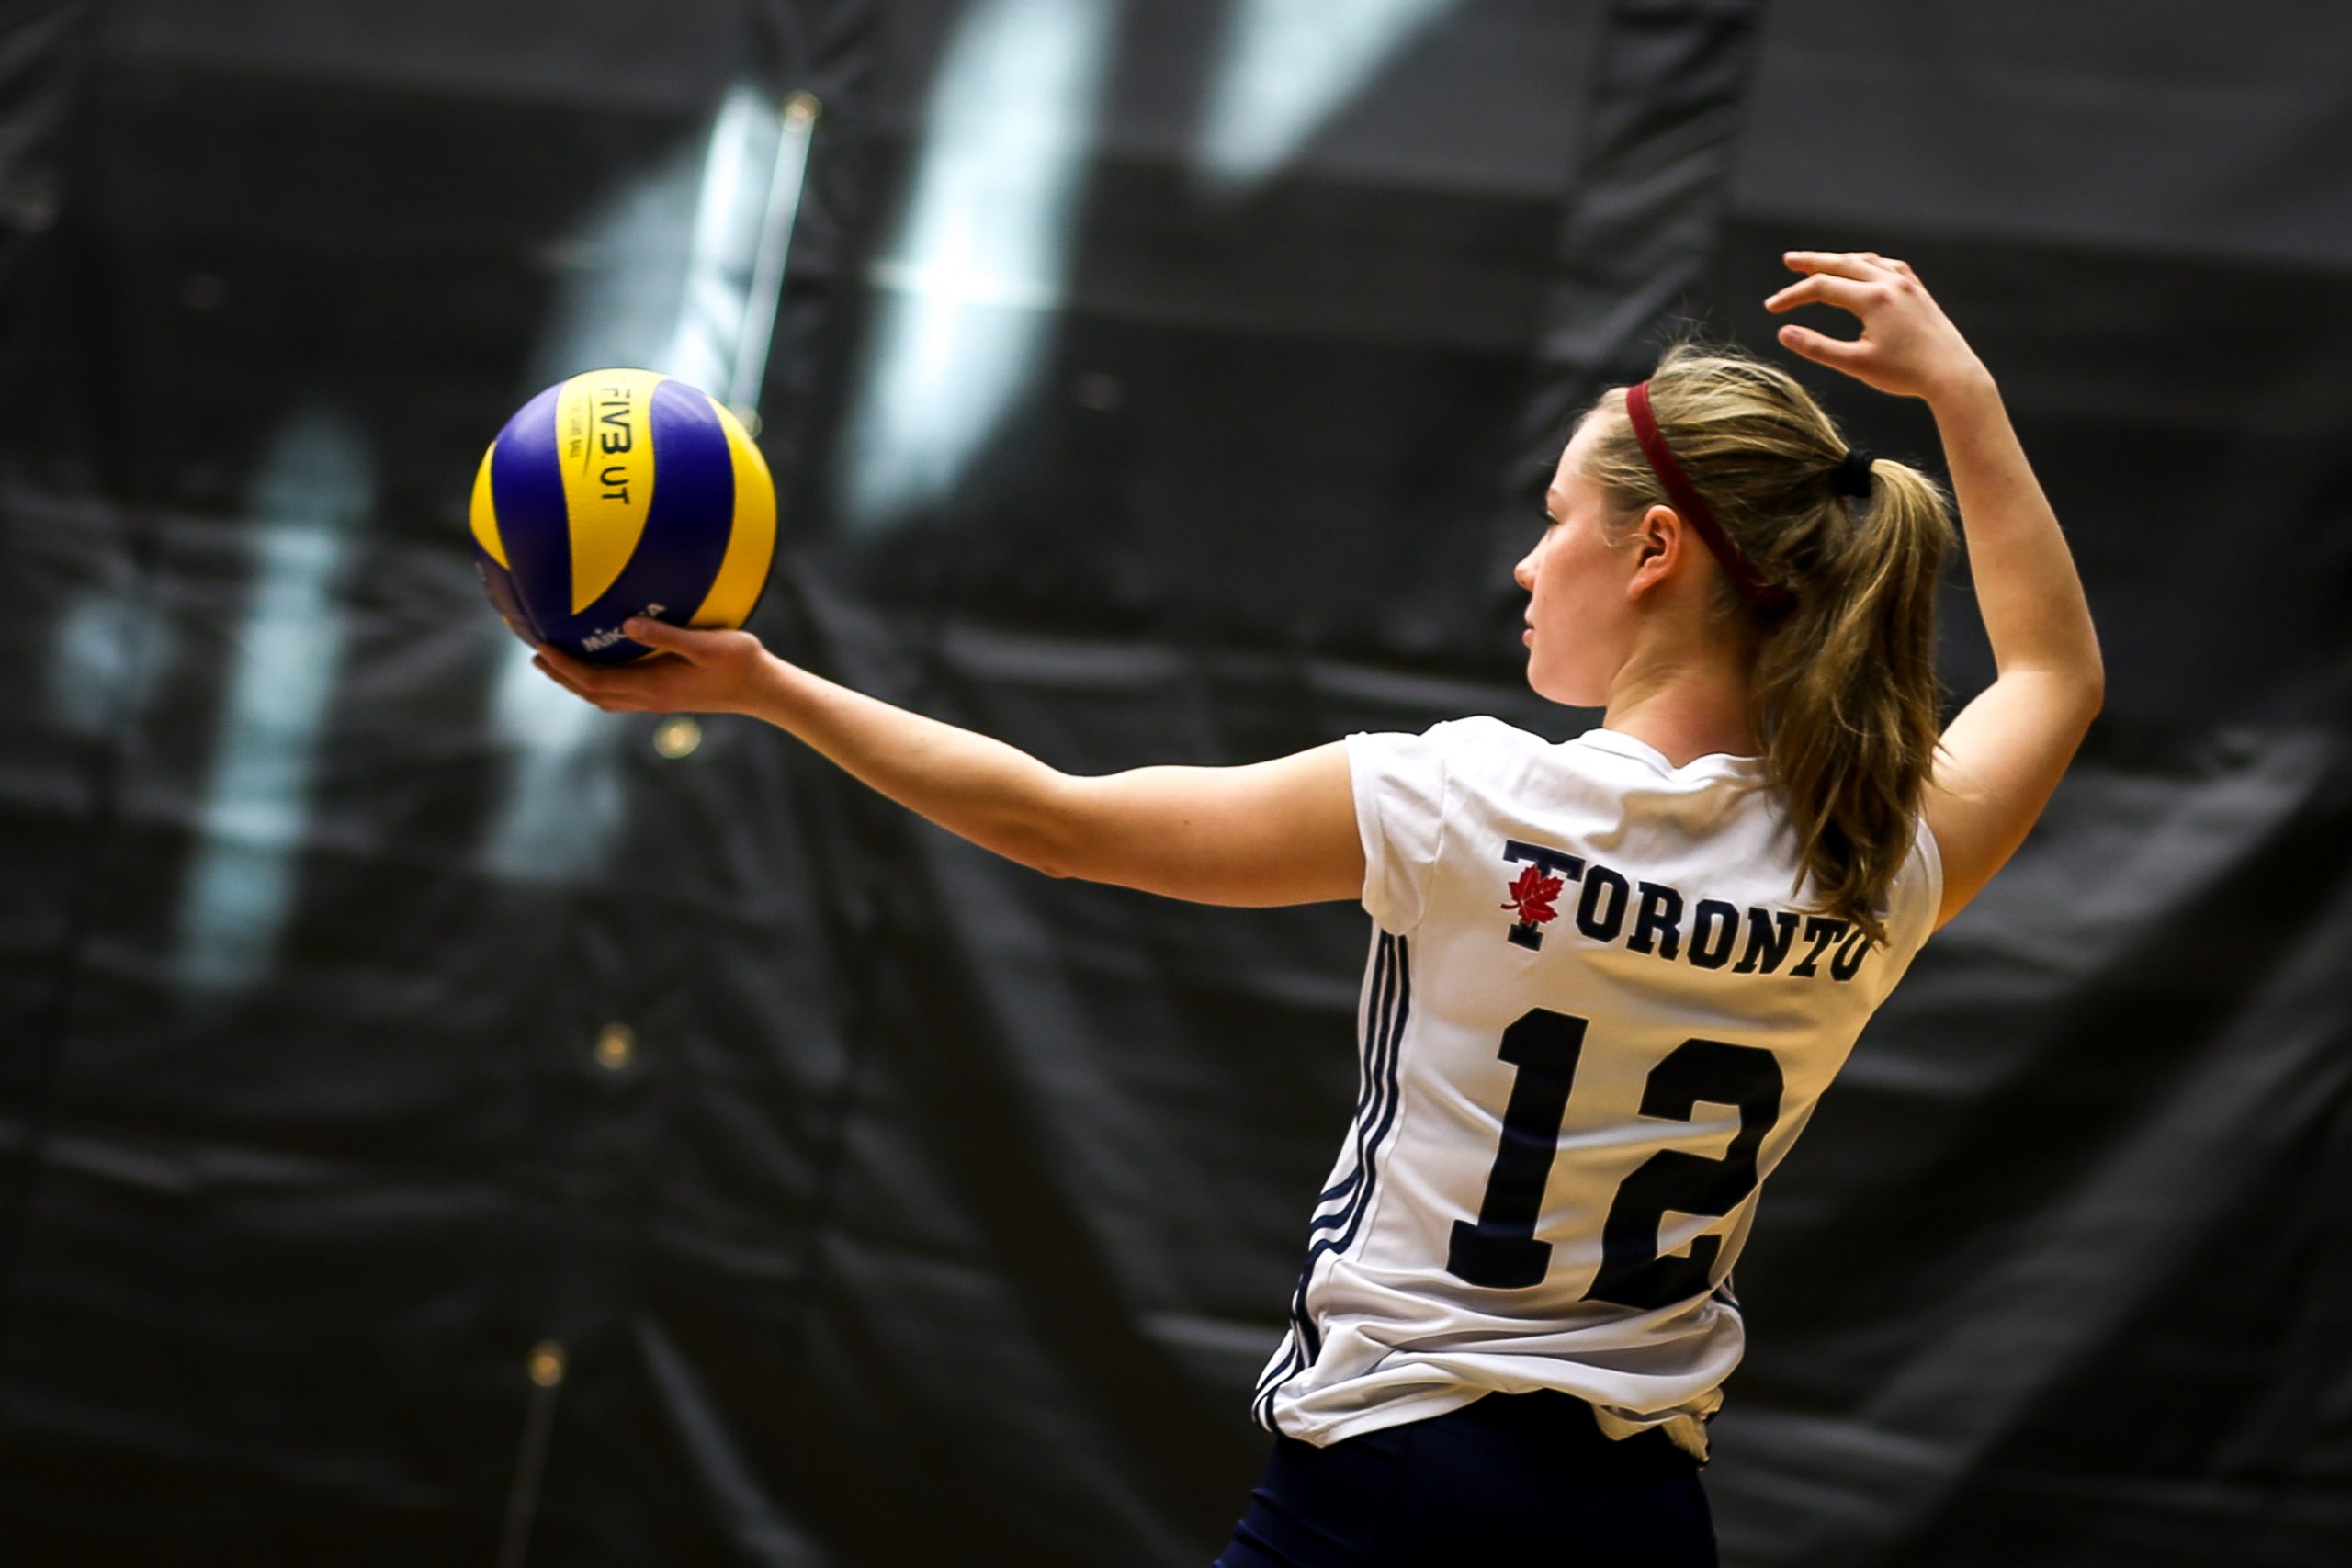 A women volleyball player prepares to spike a ball.